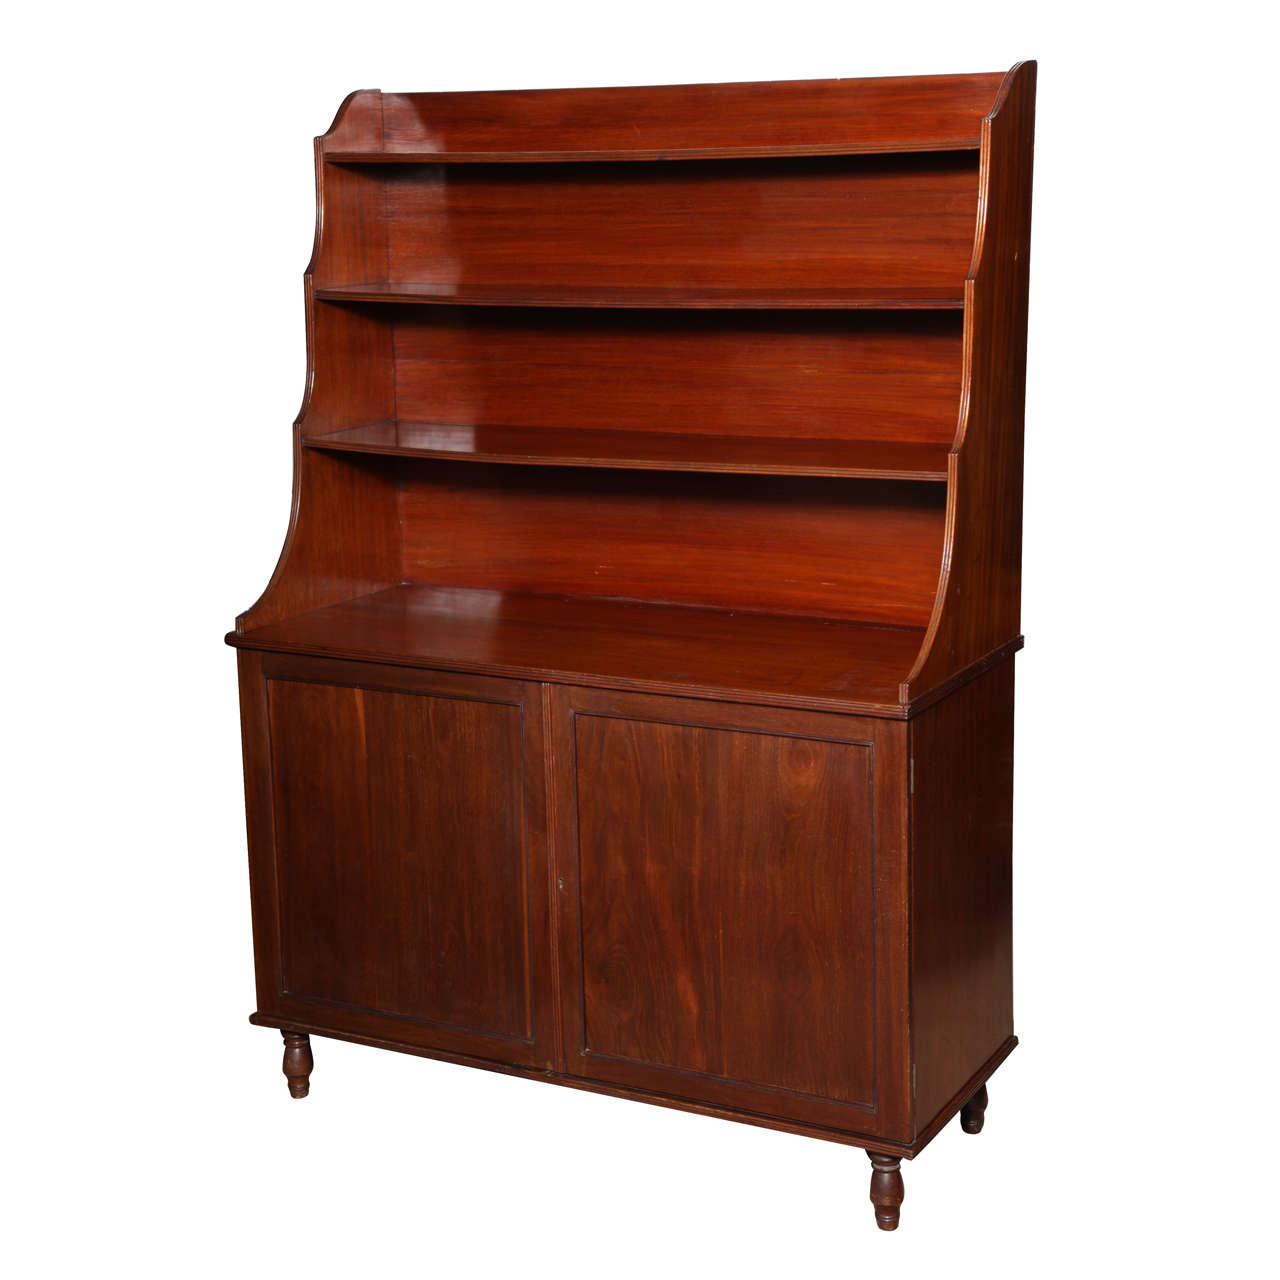 Mid 19th Century English, Mahogany Waterfall Bookcase with Two Doors and Storage For Sale